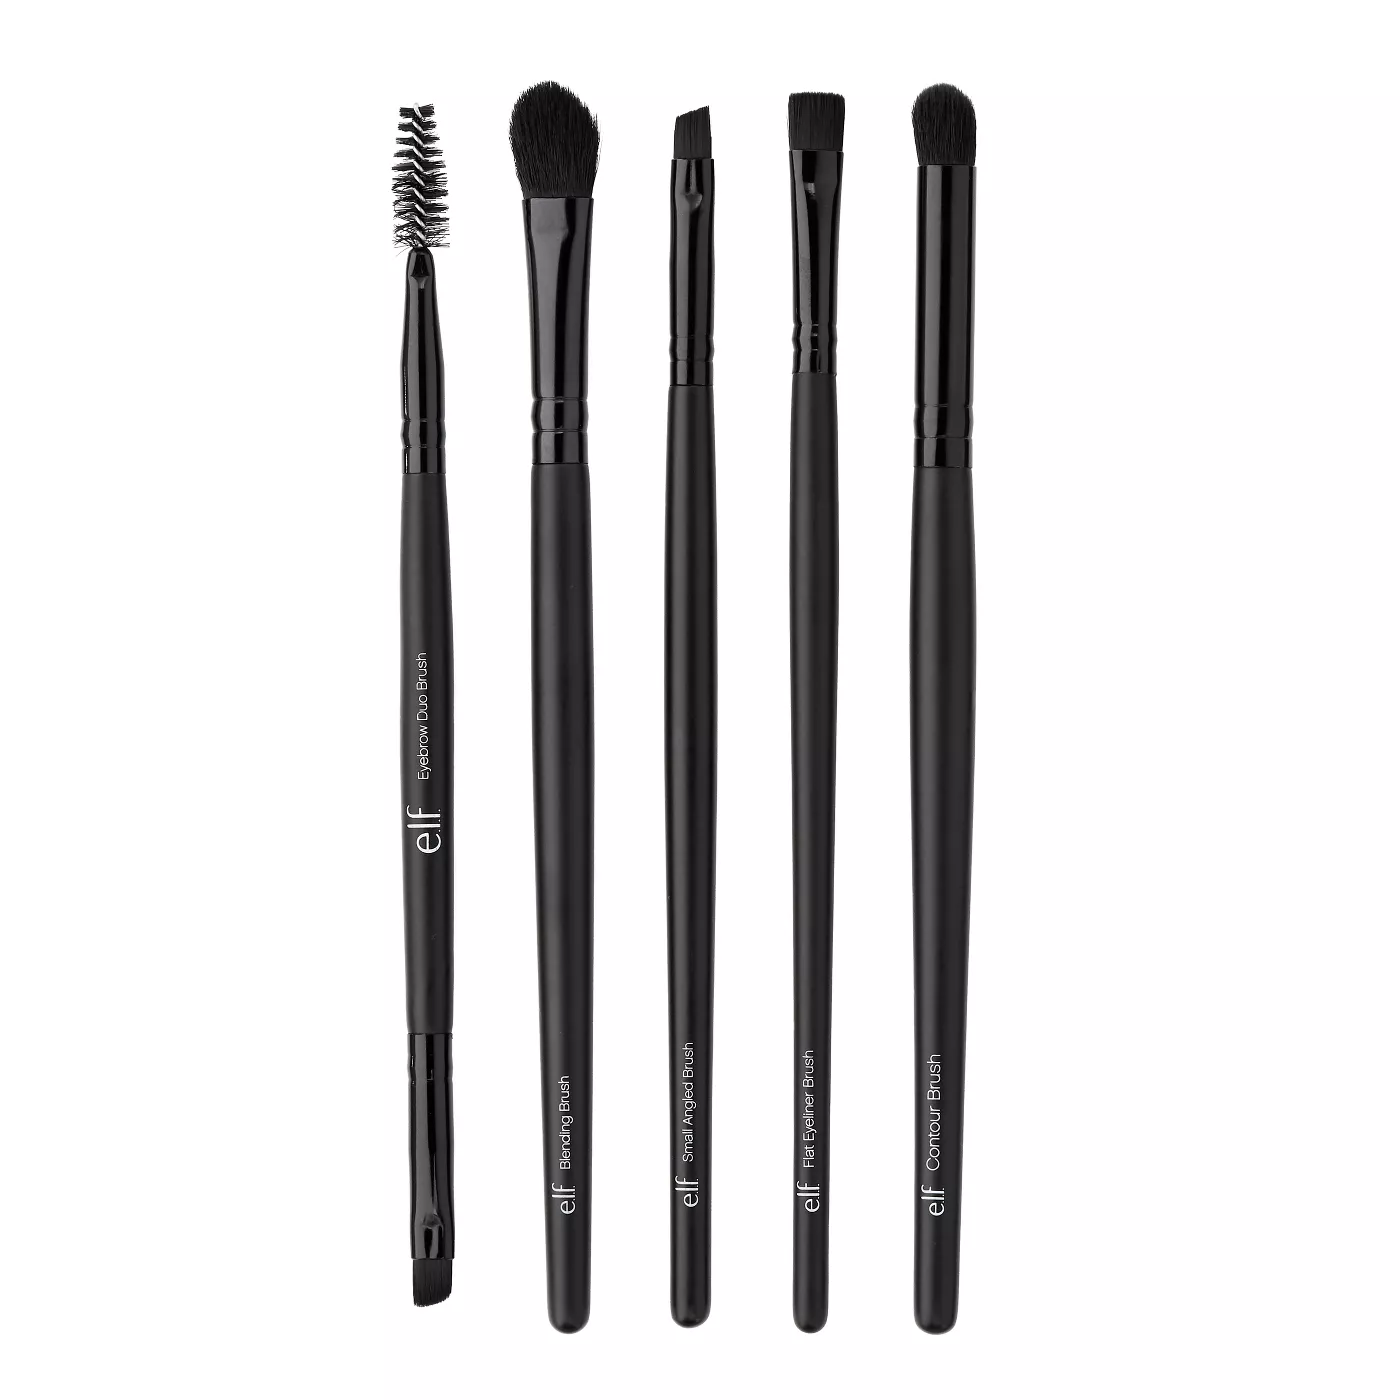 e.l.f. Eye Brush Kit is a great drugstore beauty product 
